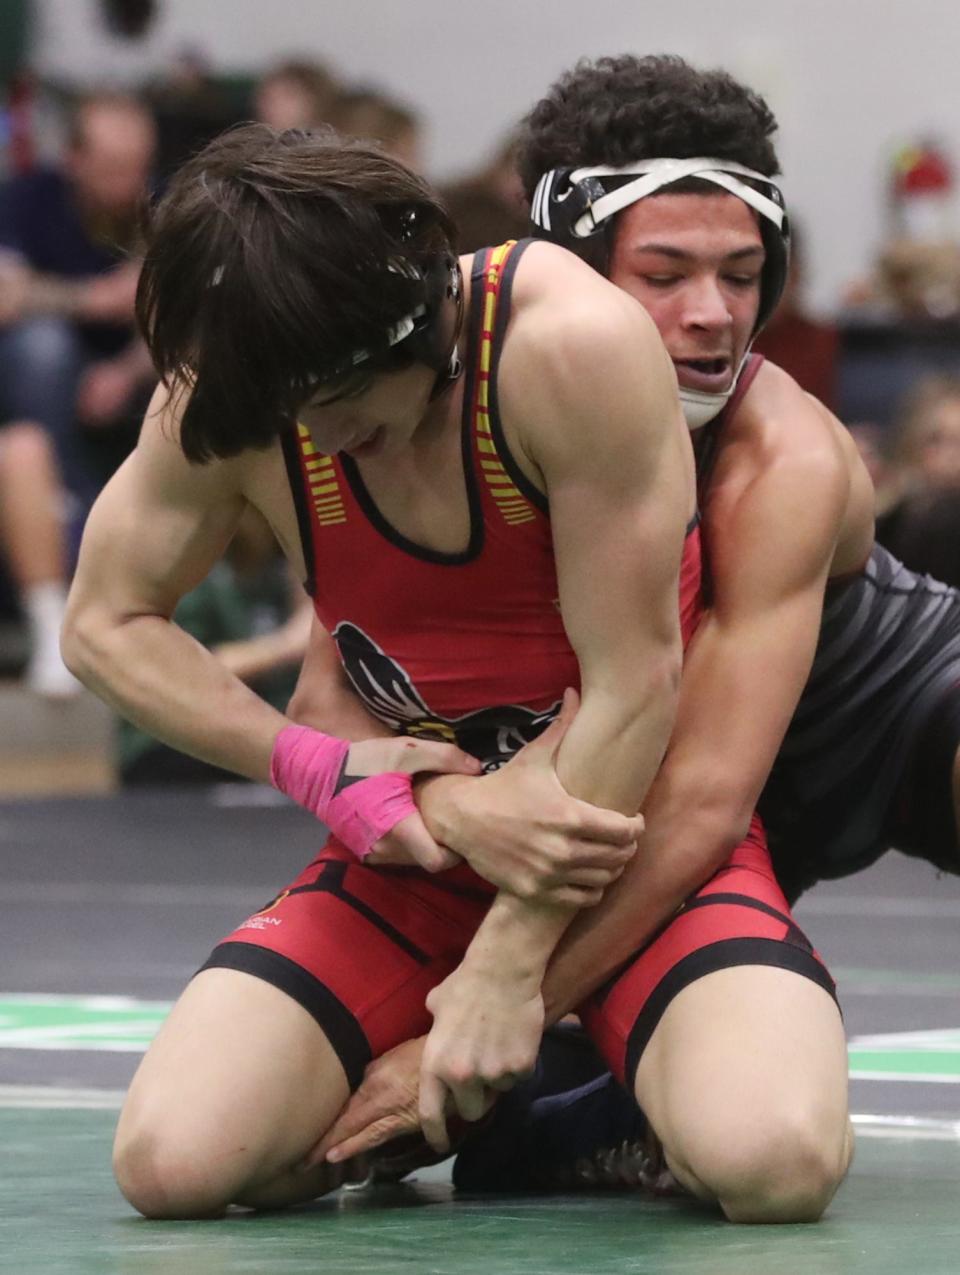 Brecksville's Mason Artino tries to break free from Stow's Robert Davis during the championship match in 132 lbs. weight class at the 2024 Suburban League tournament at Highland High School in Medina on Saturday, Jan. 27, 2024. Stow's Davis won the match.